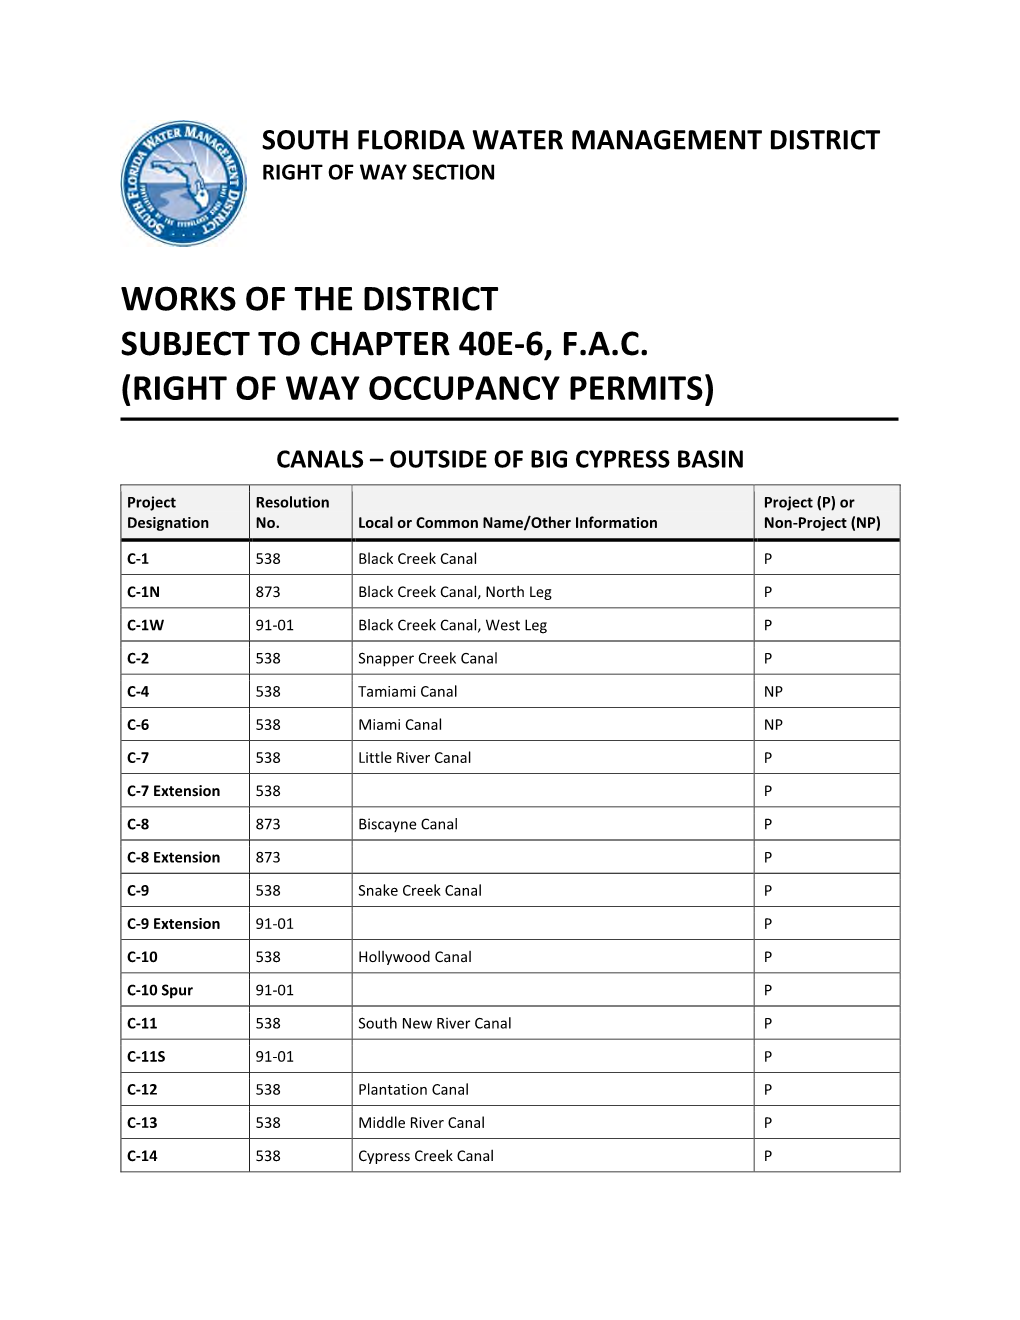 Works of the District Subject to Chapter 40E-6, F.A.C